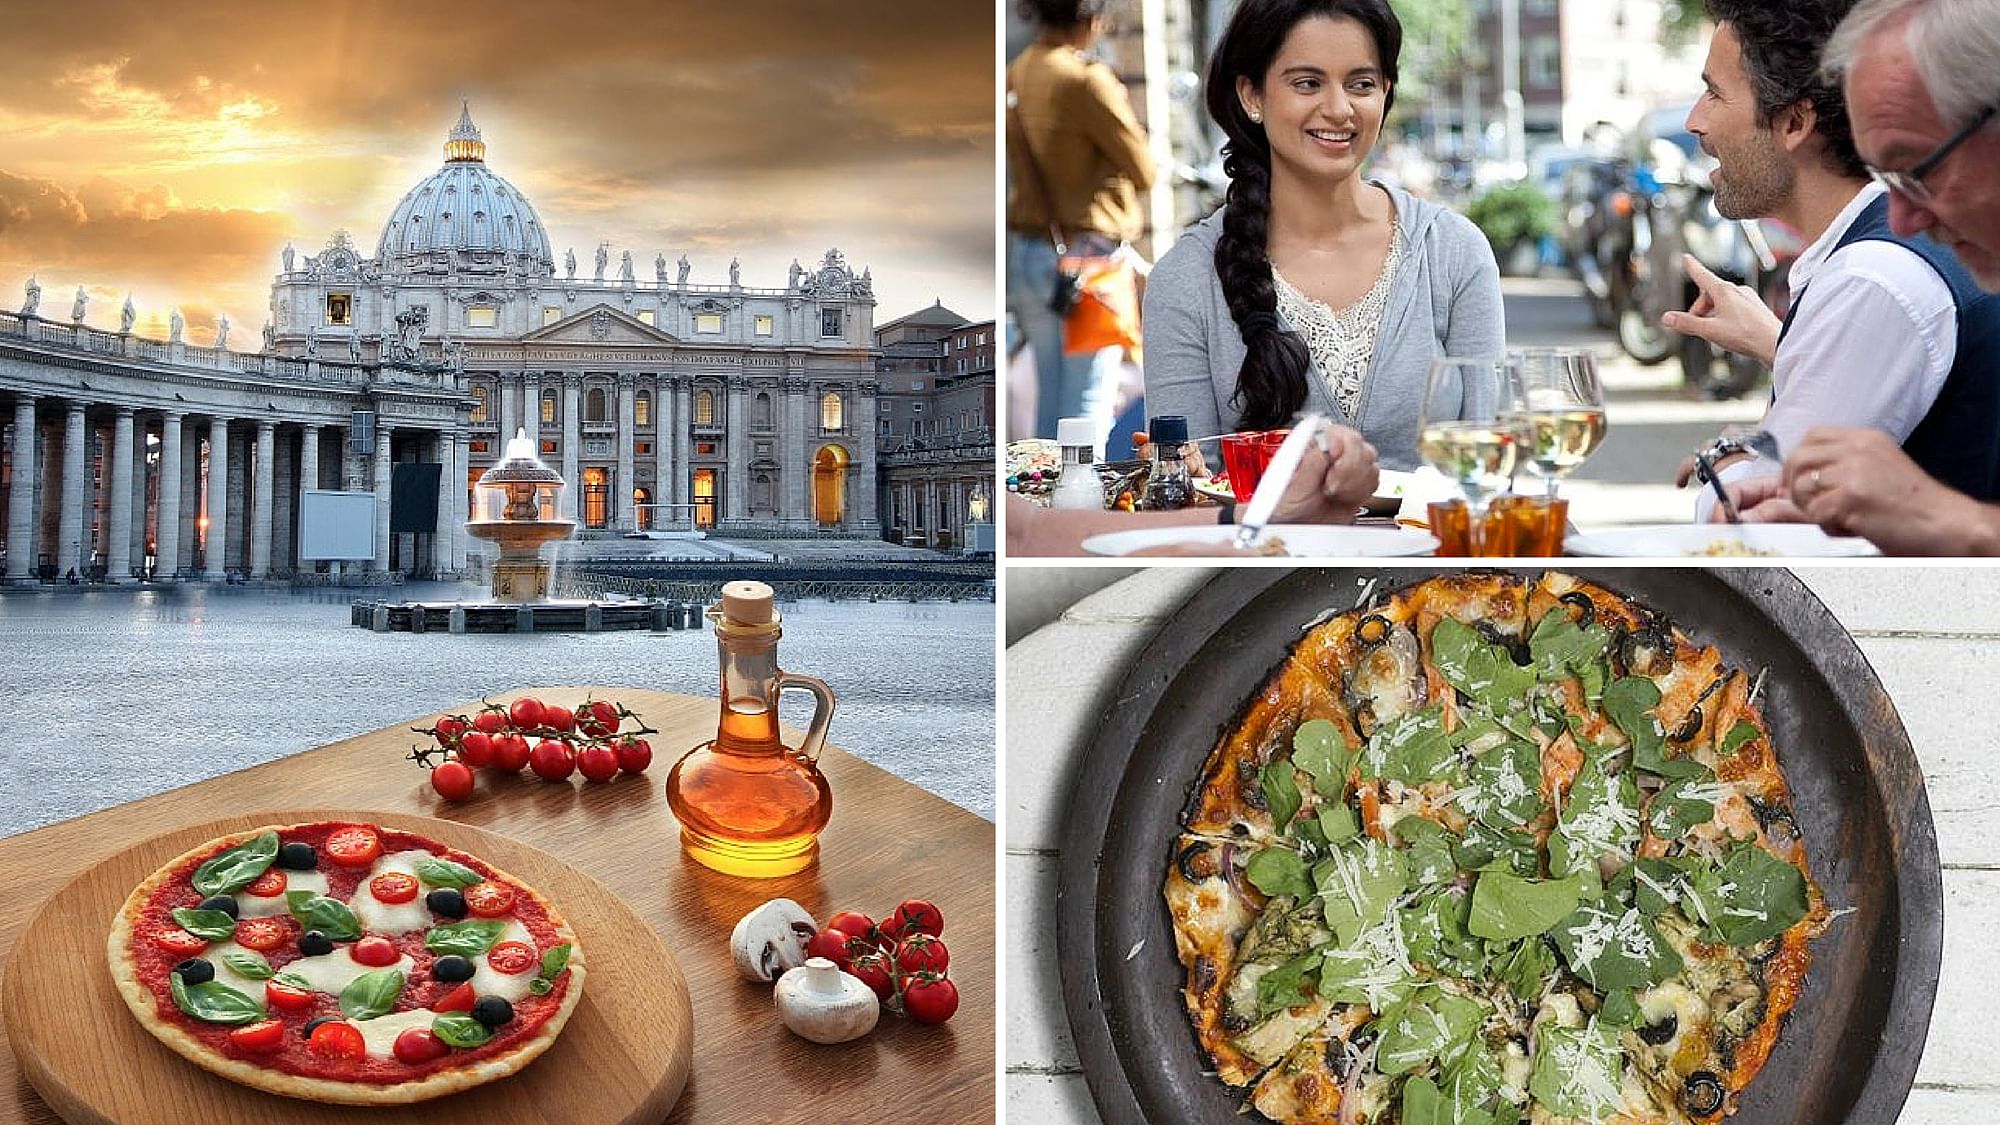 Kangana Ranaut had it right in <i>Queen</i> – Italian food, particularly pizzas, lack the much-needed masala. (Photo: iStock/YouTube screenshot)